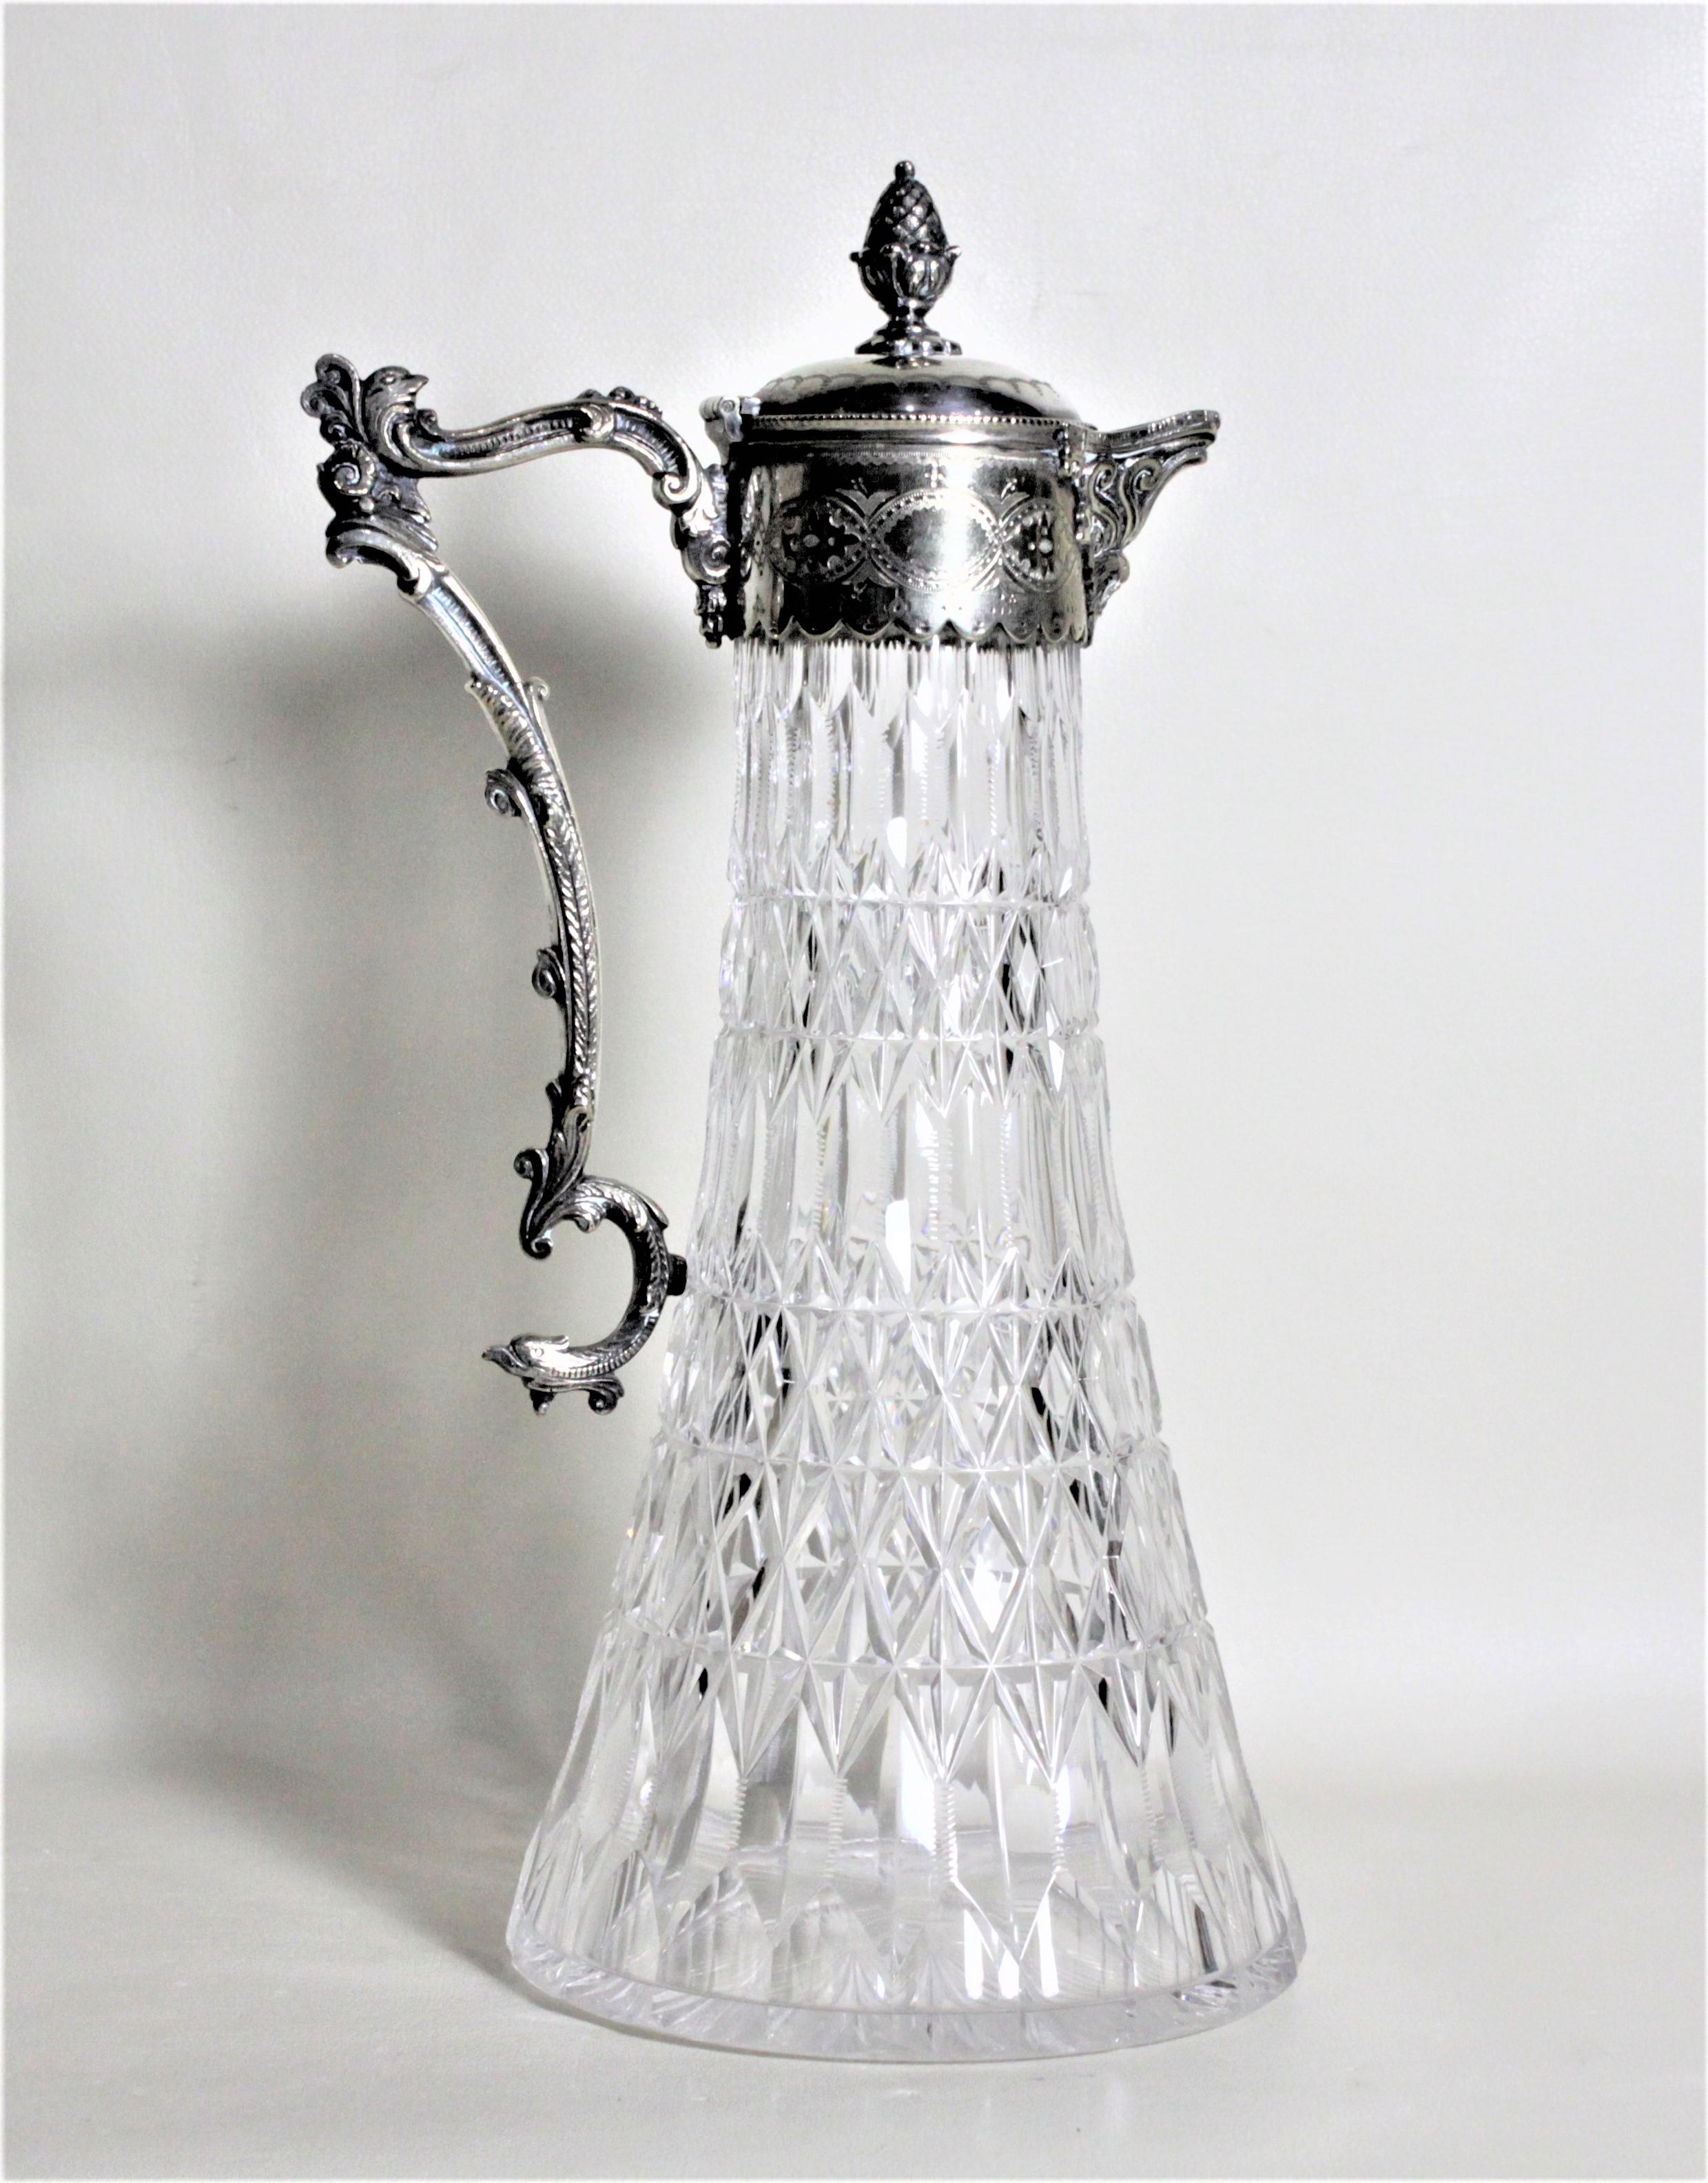 Victorian Antique English Silver Plated & Cut Crystal Claret Jug or Decanter